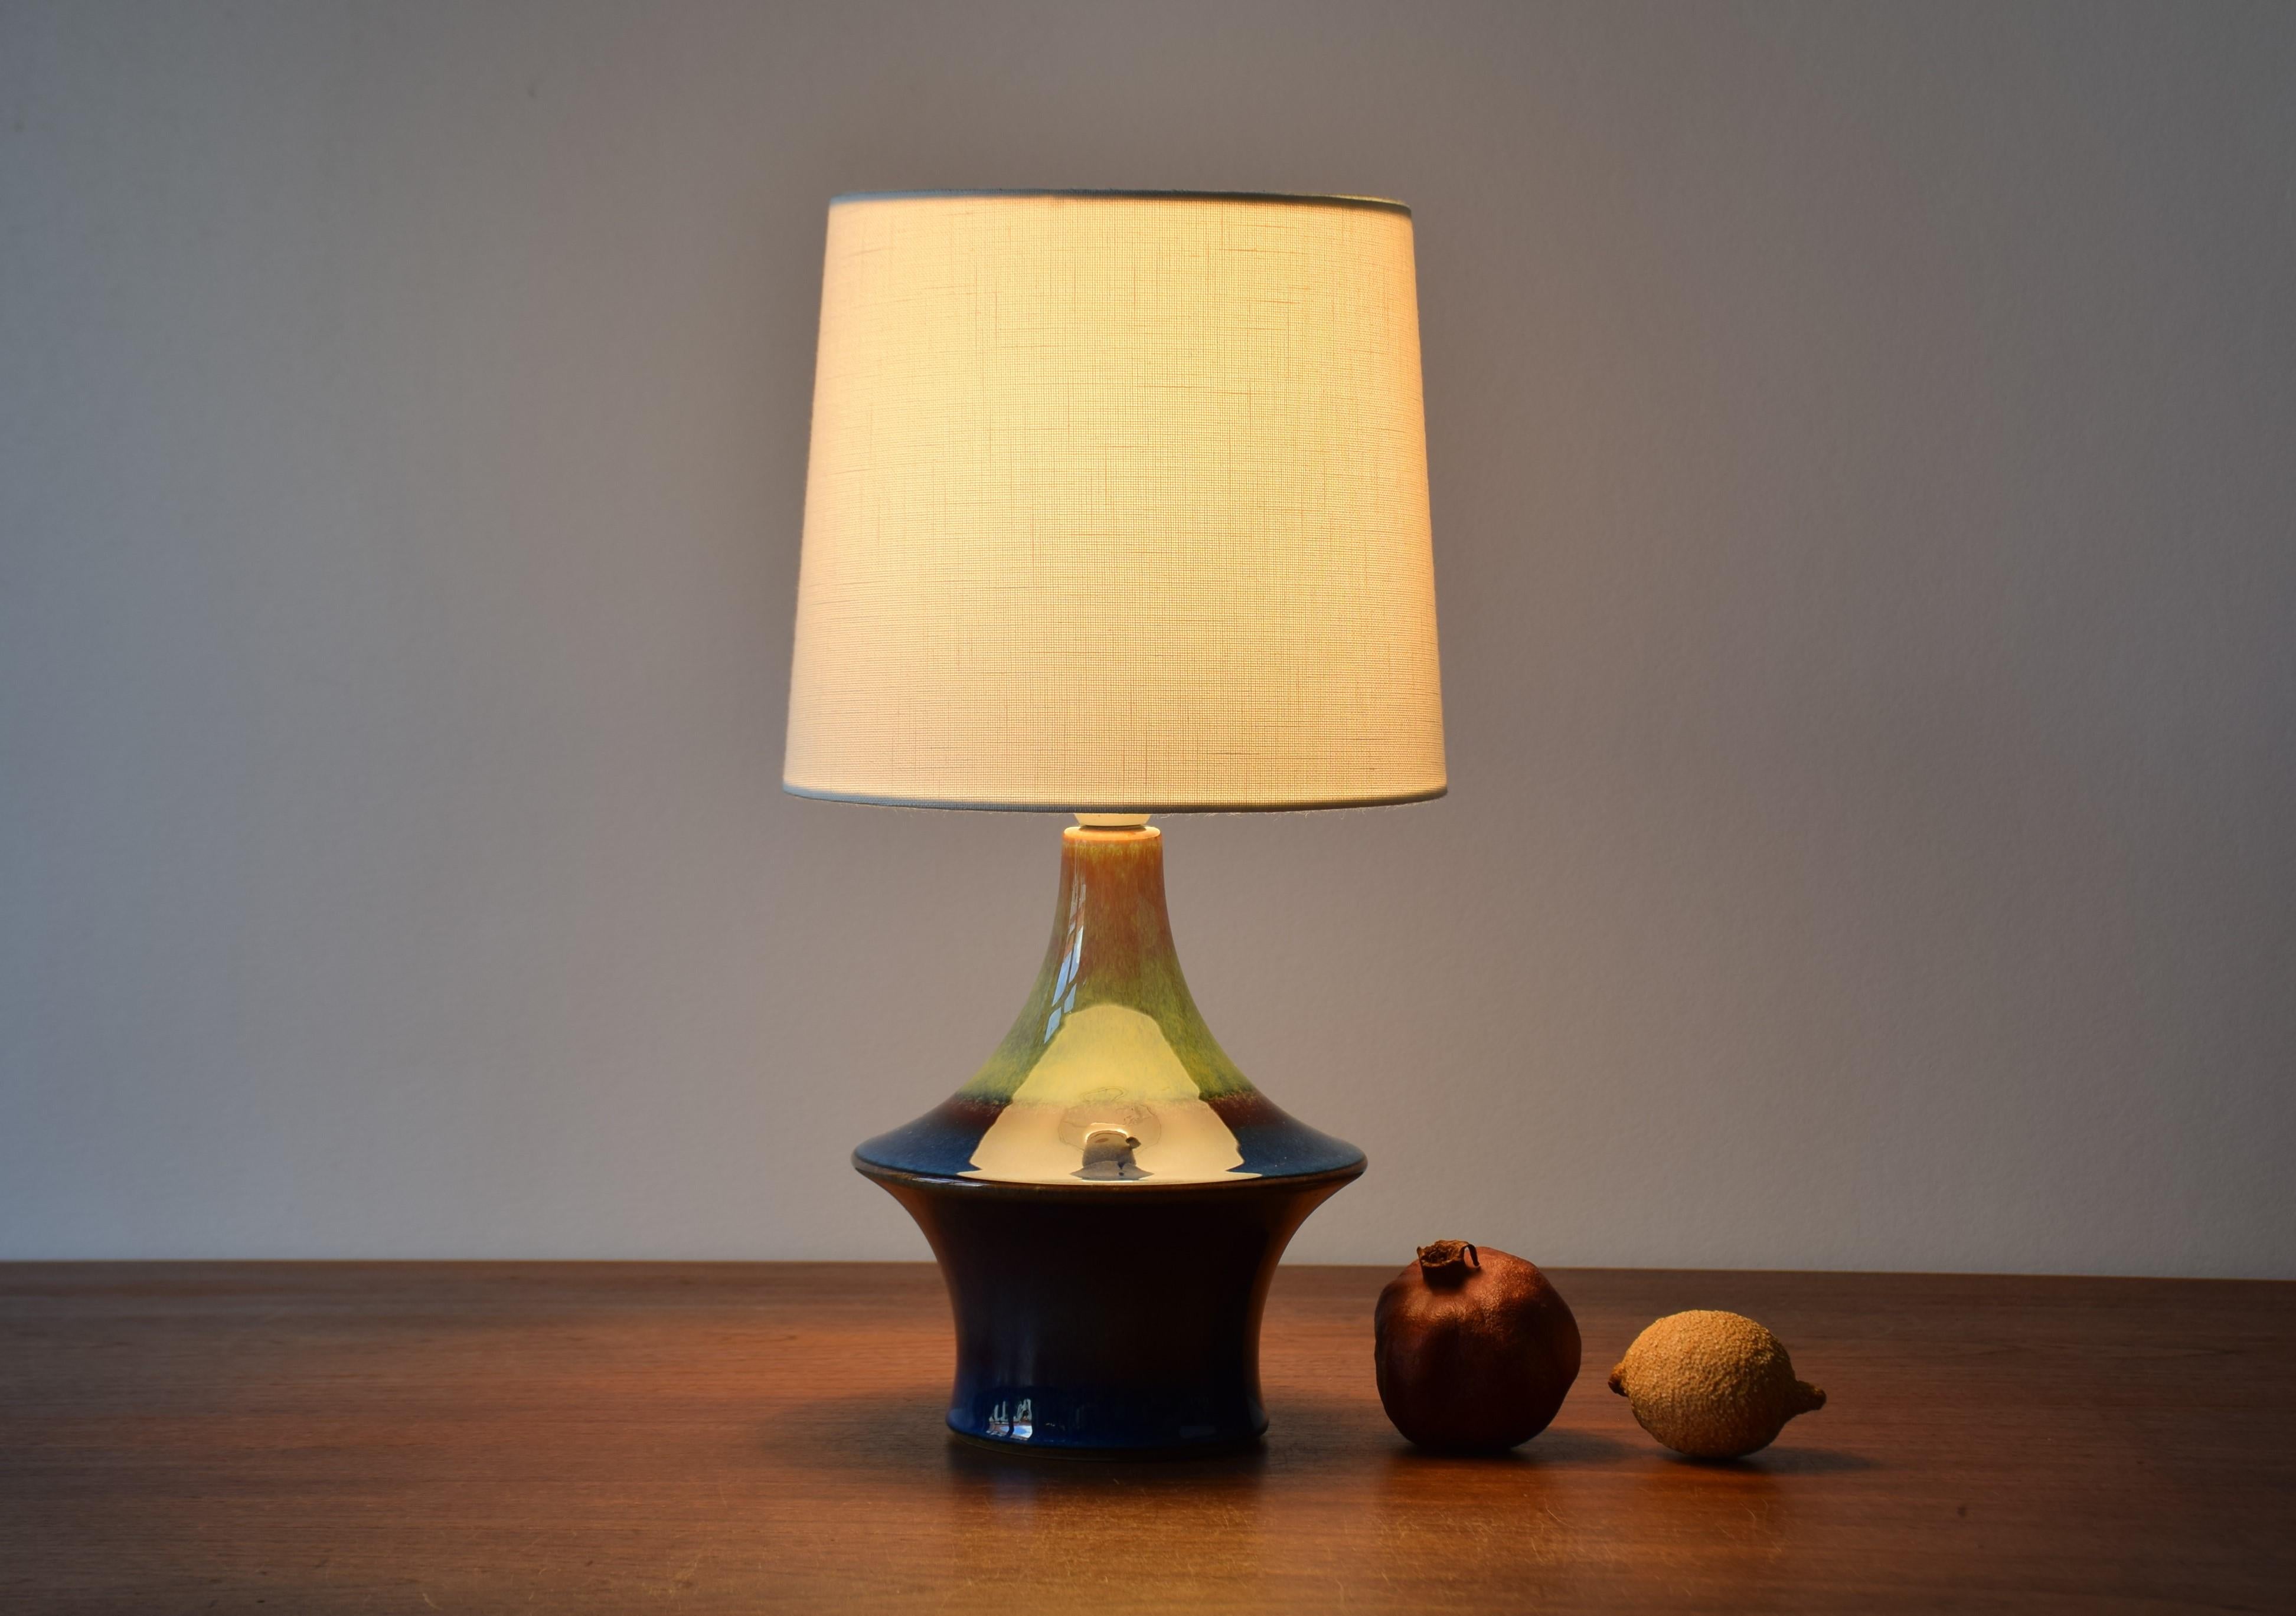 Small sculptural table lamp from Søholm Stentøj, Denmark, circa 1960s.
The lamp has glaze with a beautiful color play in blue, brown and green.

Included is a new clip on blulb lamp shade designed and made in Denmark. It´s made of woven fabric